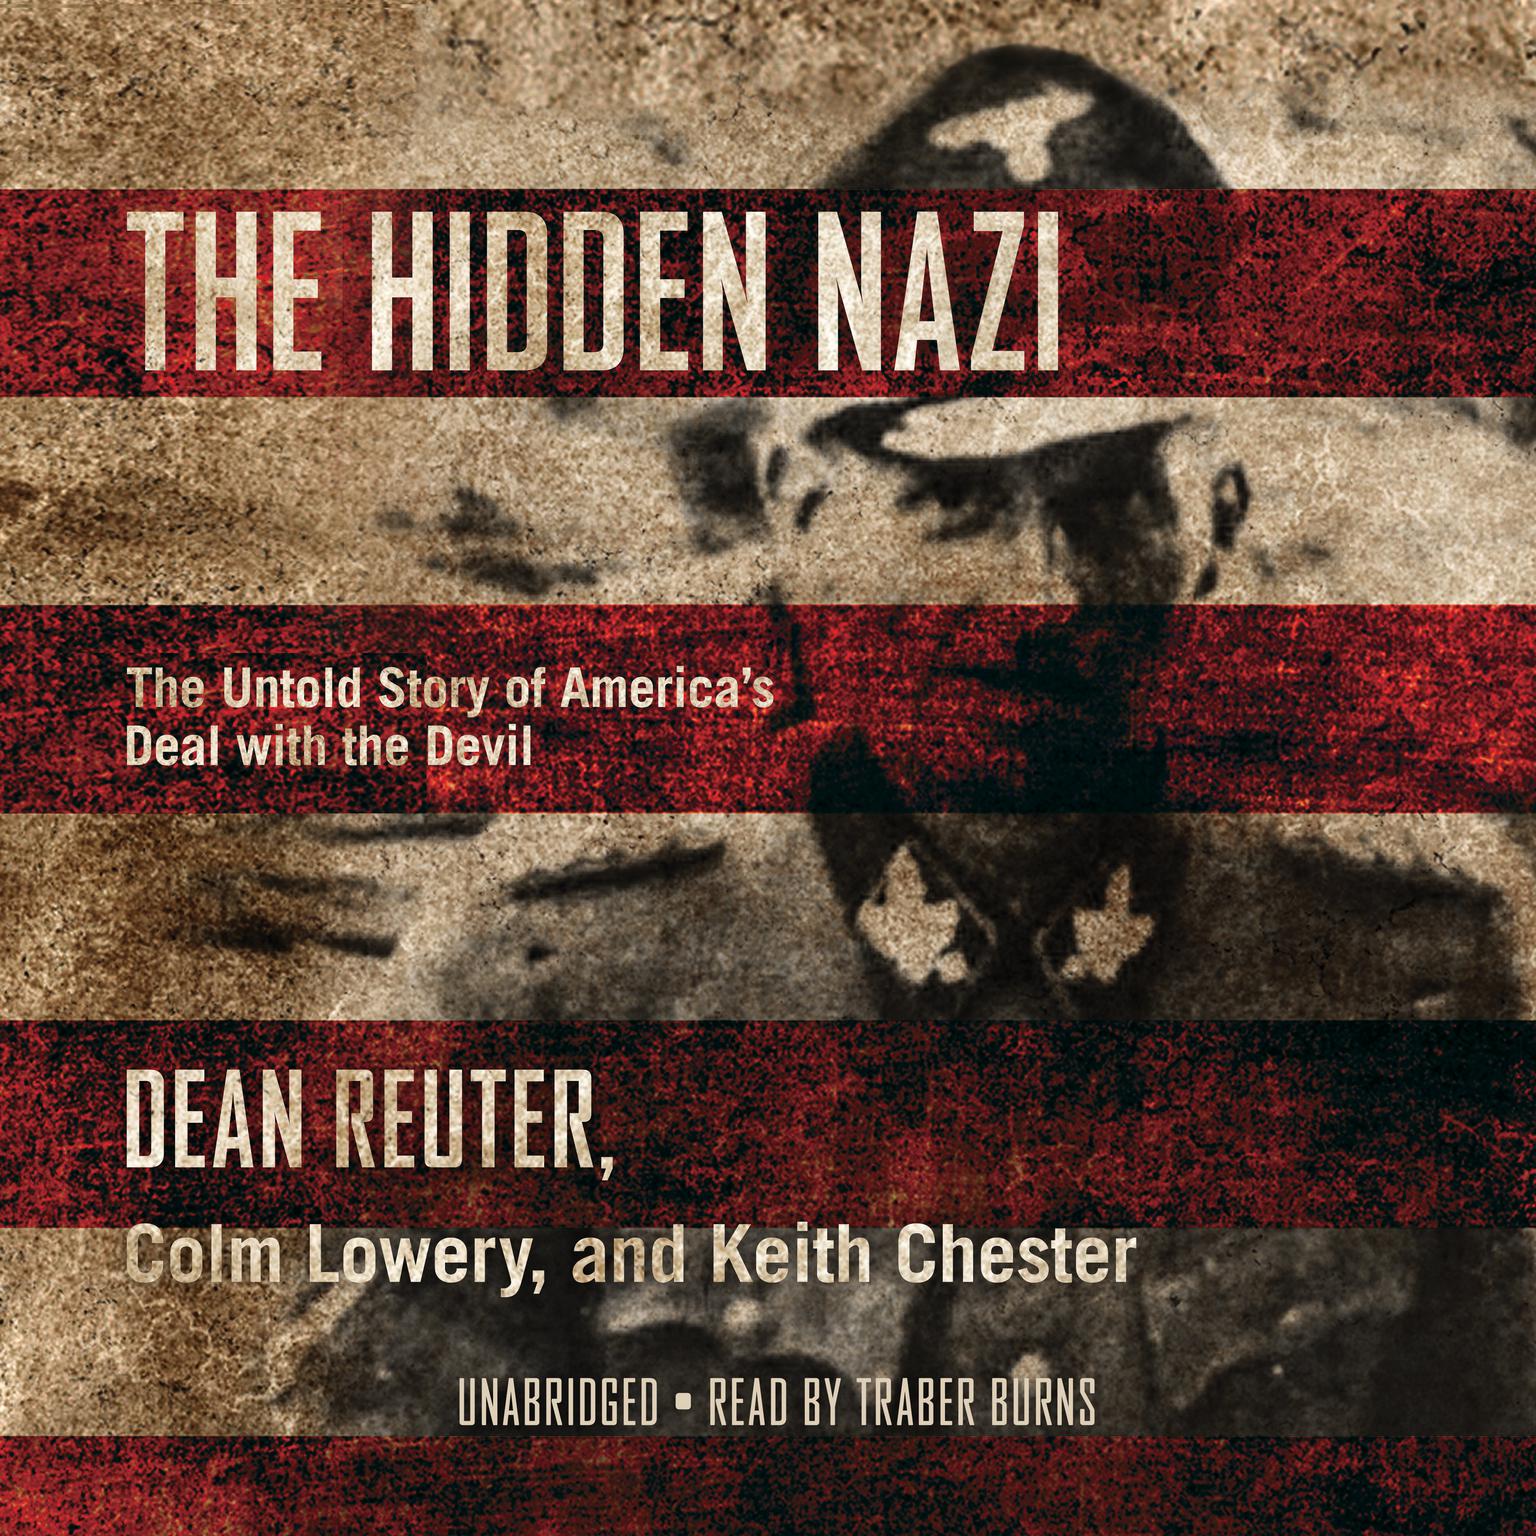 The Hidden Nazi: The Untold Story of America’s Deal with the Devil Audiobook, by Dean Reuter